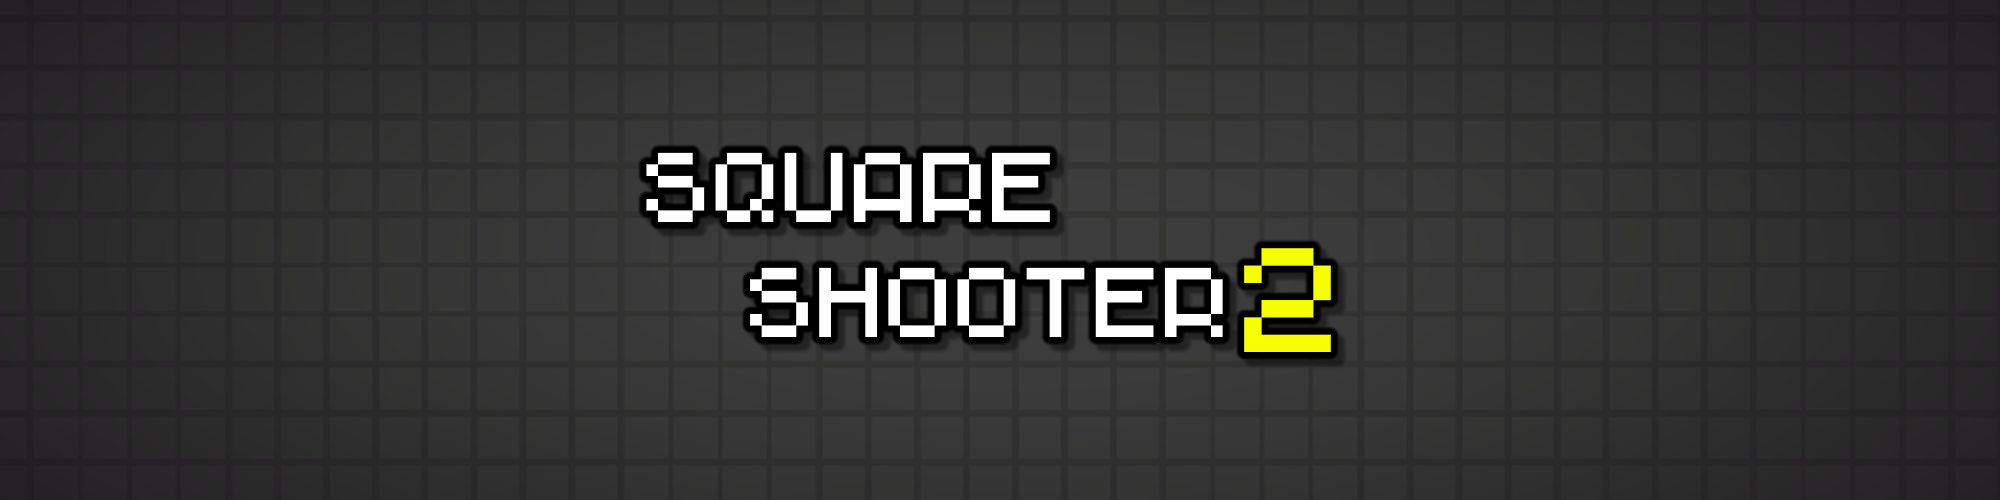 Square Shooter 2